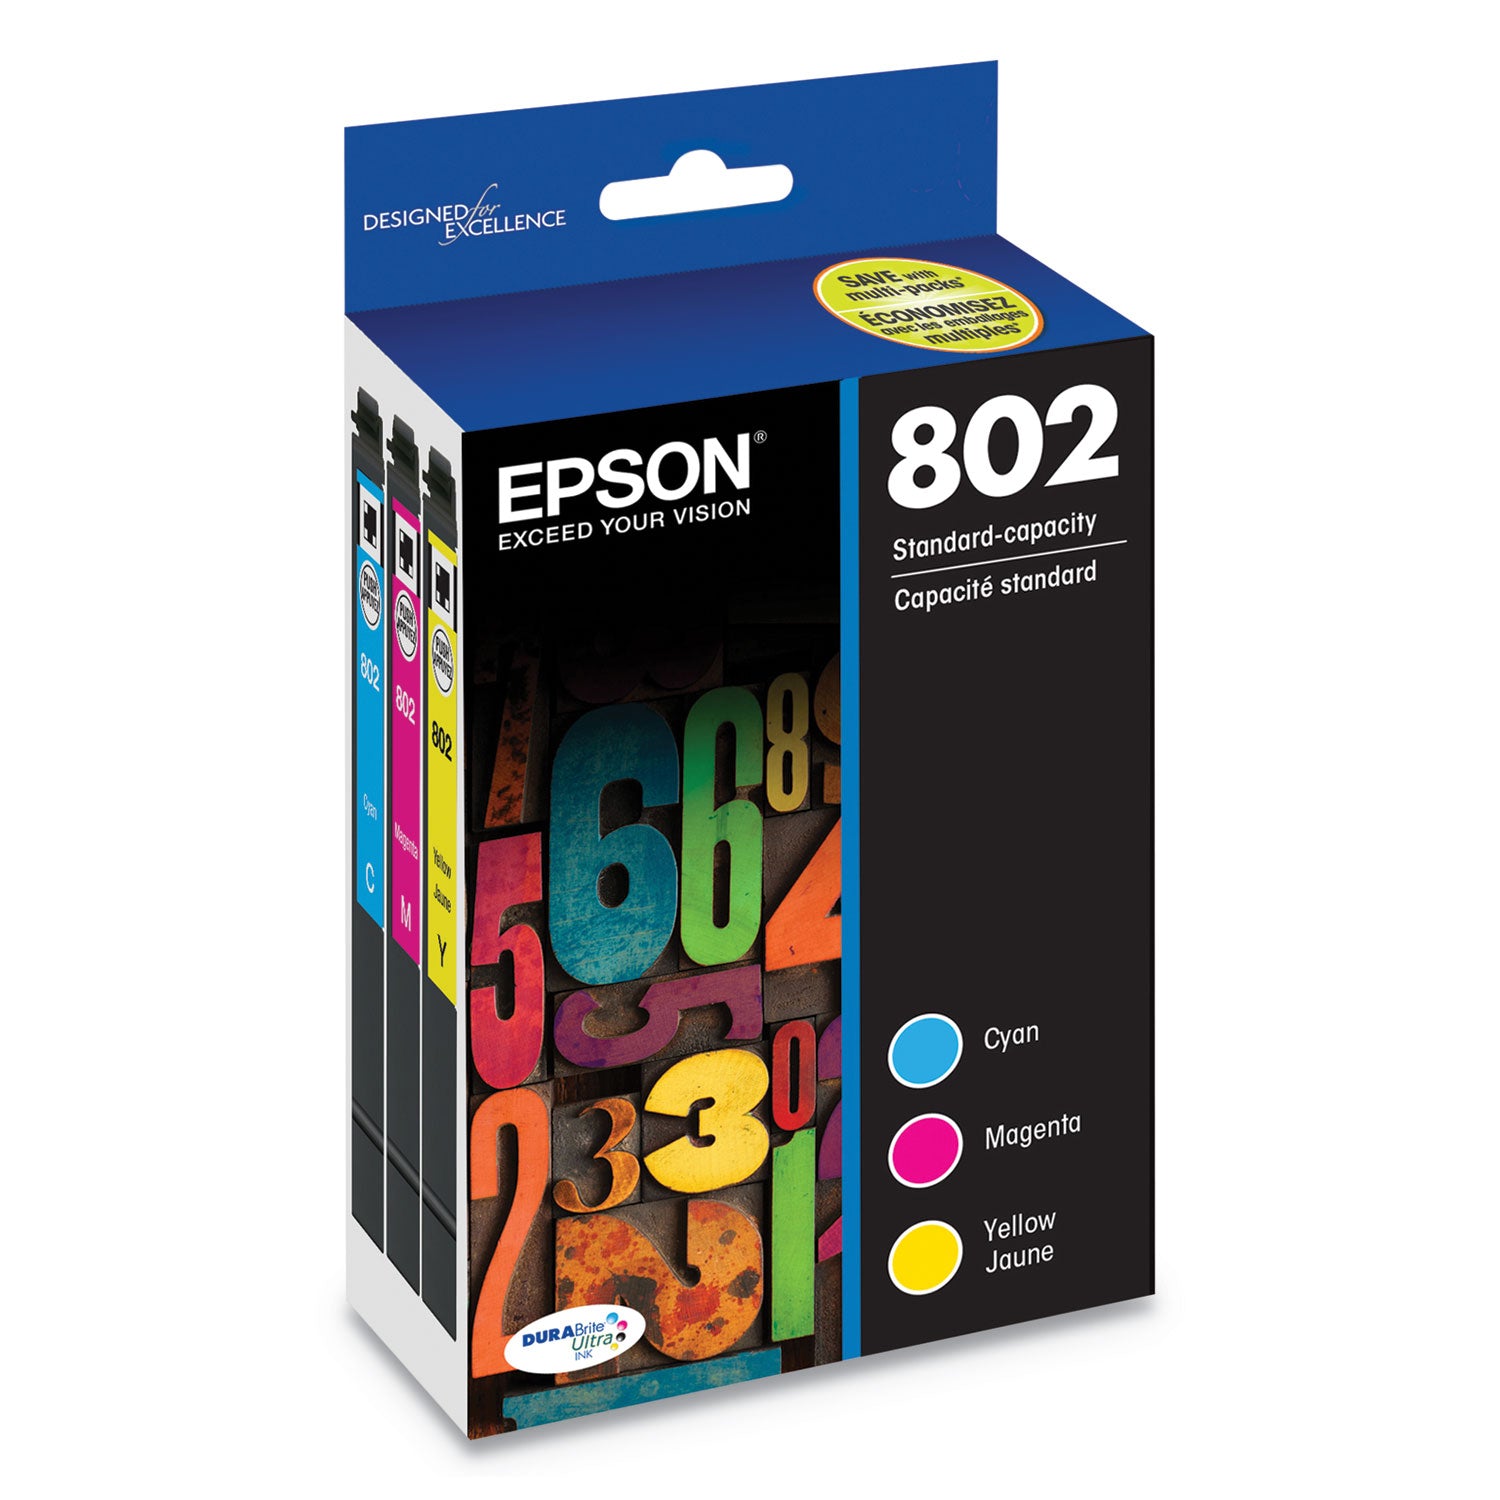 t802520-s-802-durabrite-ultra-ink-650-page-yield-cyan-magenta-yellow_epst802520s - 2